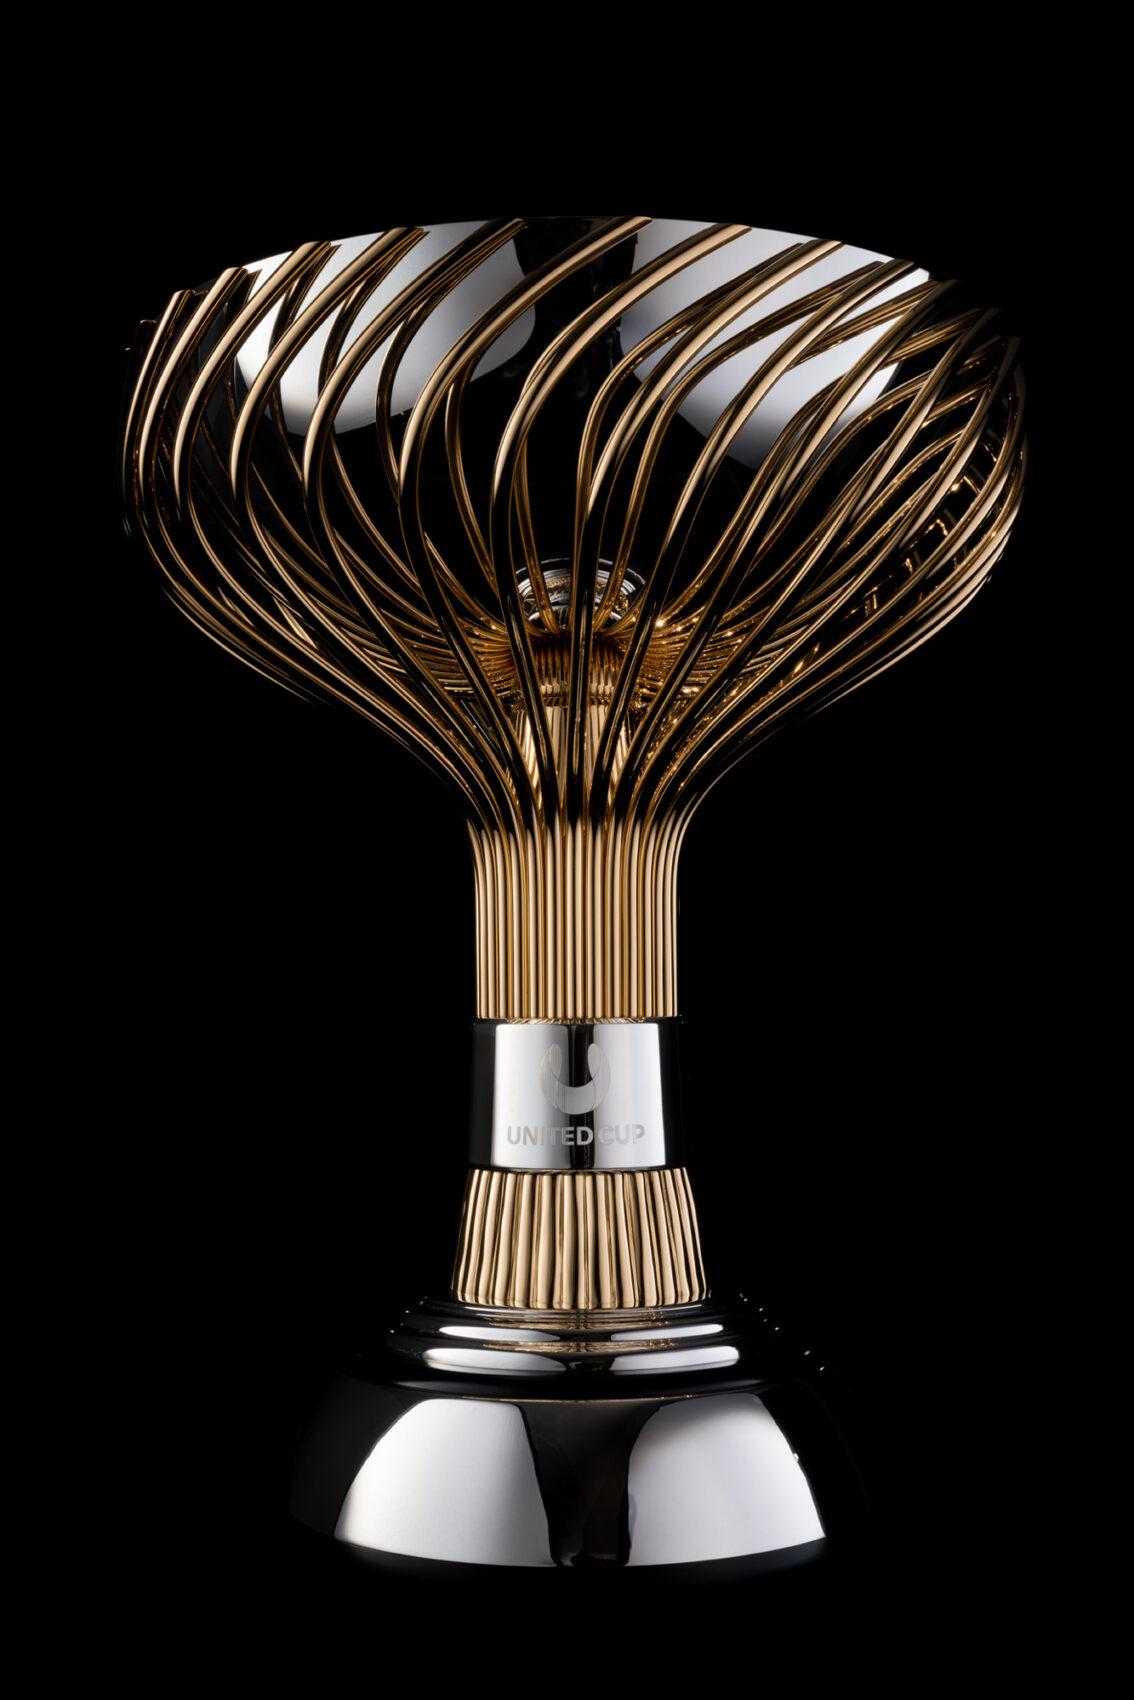 Makers of the FIBA World Cup Trophy - Thomas Lyte